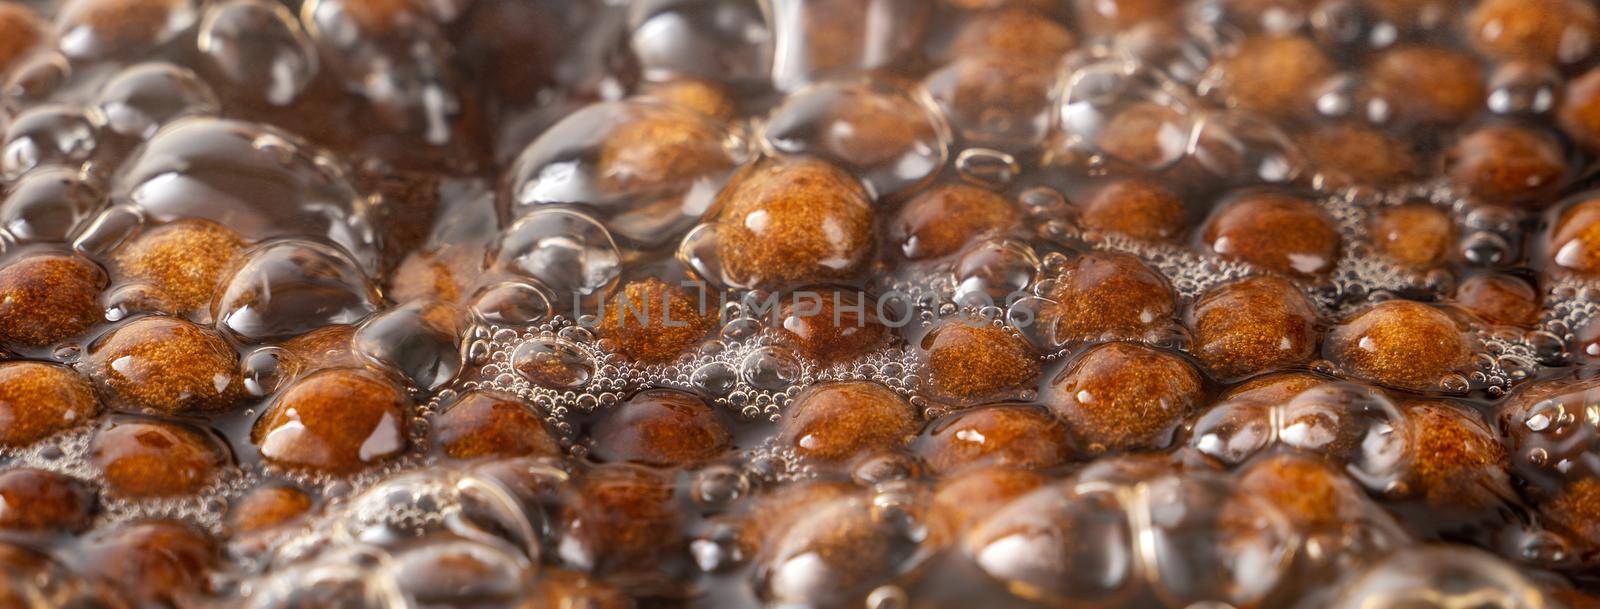 Cooking, boiling brown sugar flavor tapioca pearl balls, ingredient of bubble tea, preparing food and drink, close up, recipe cookbook steps design concept.